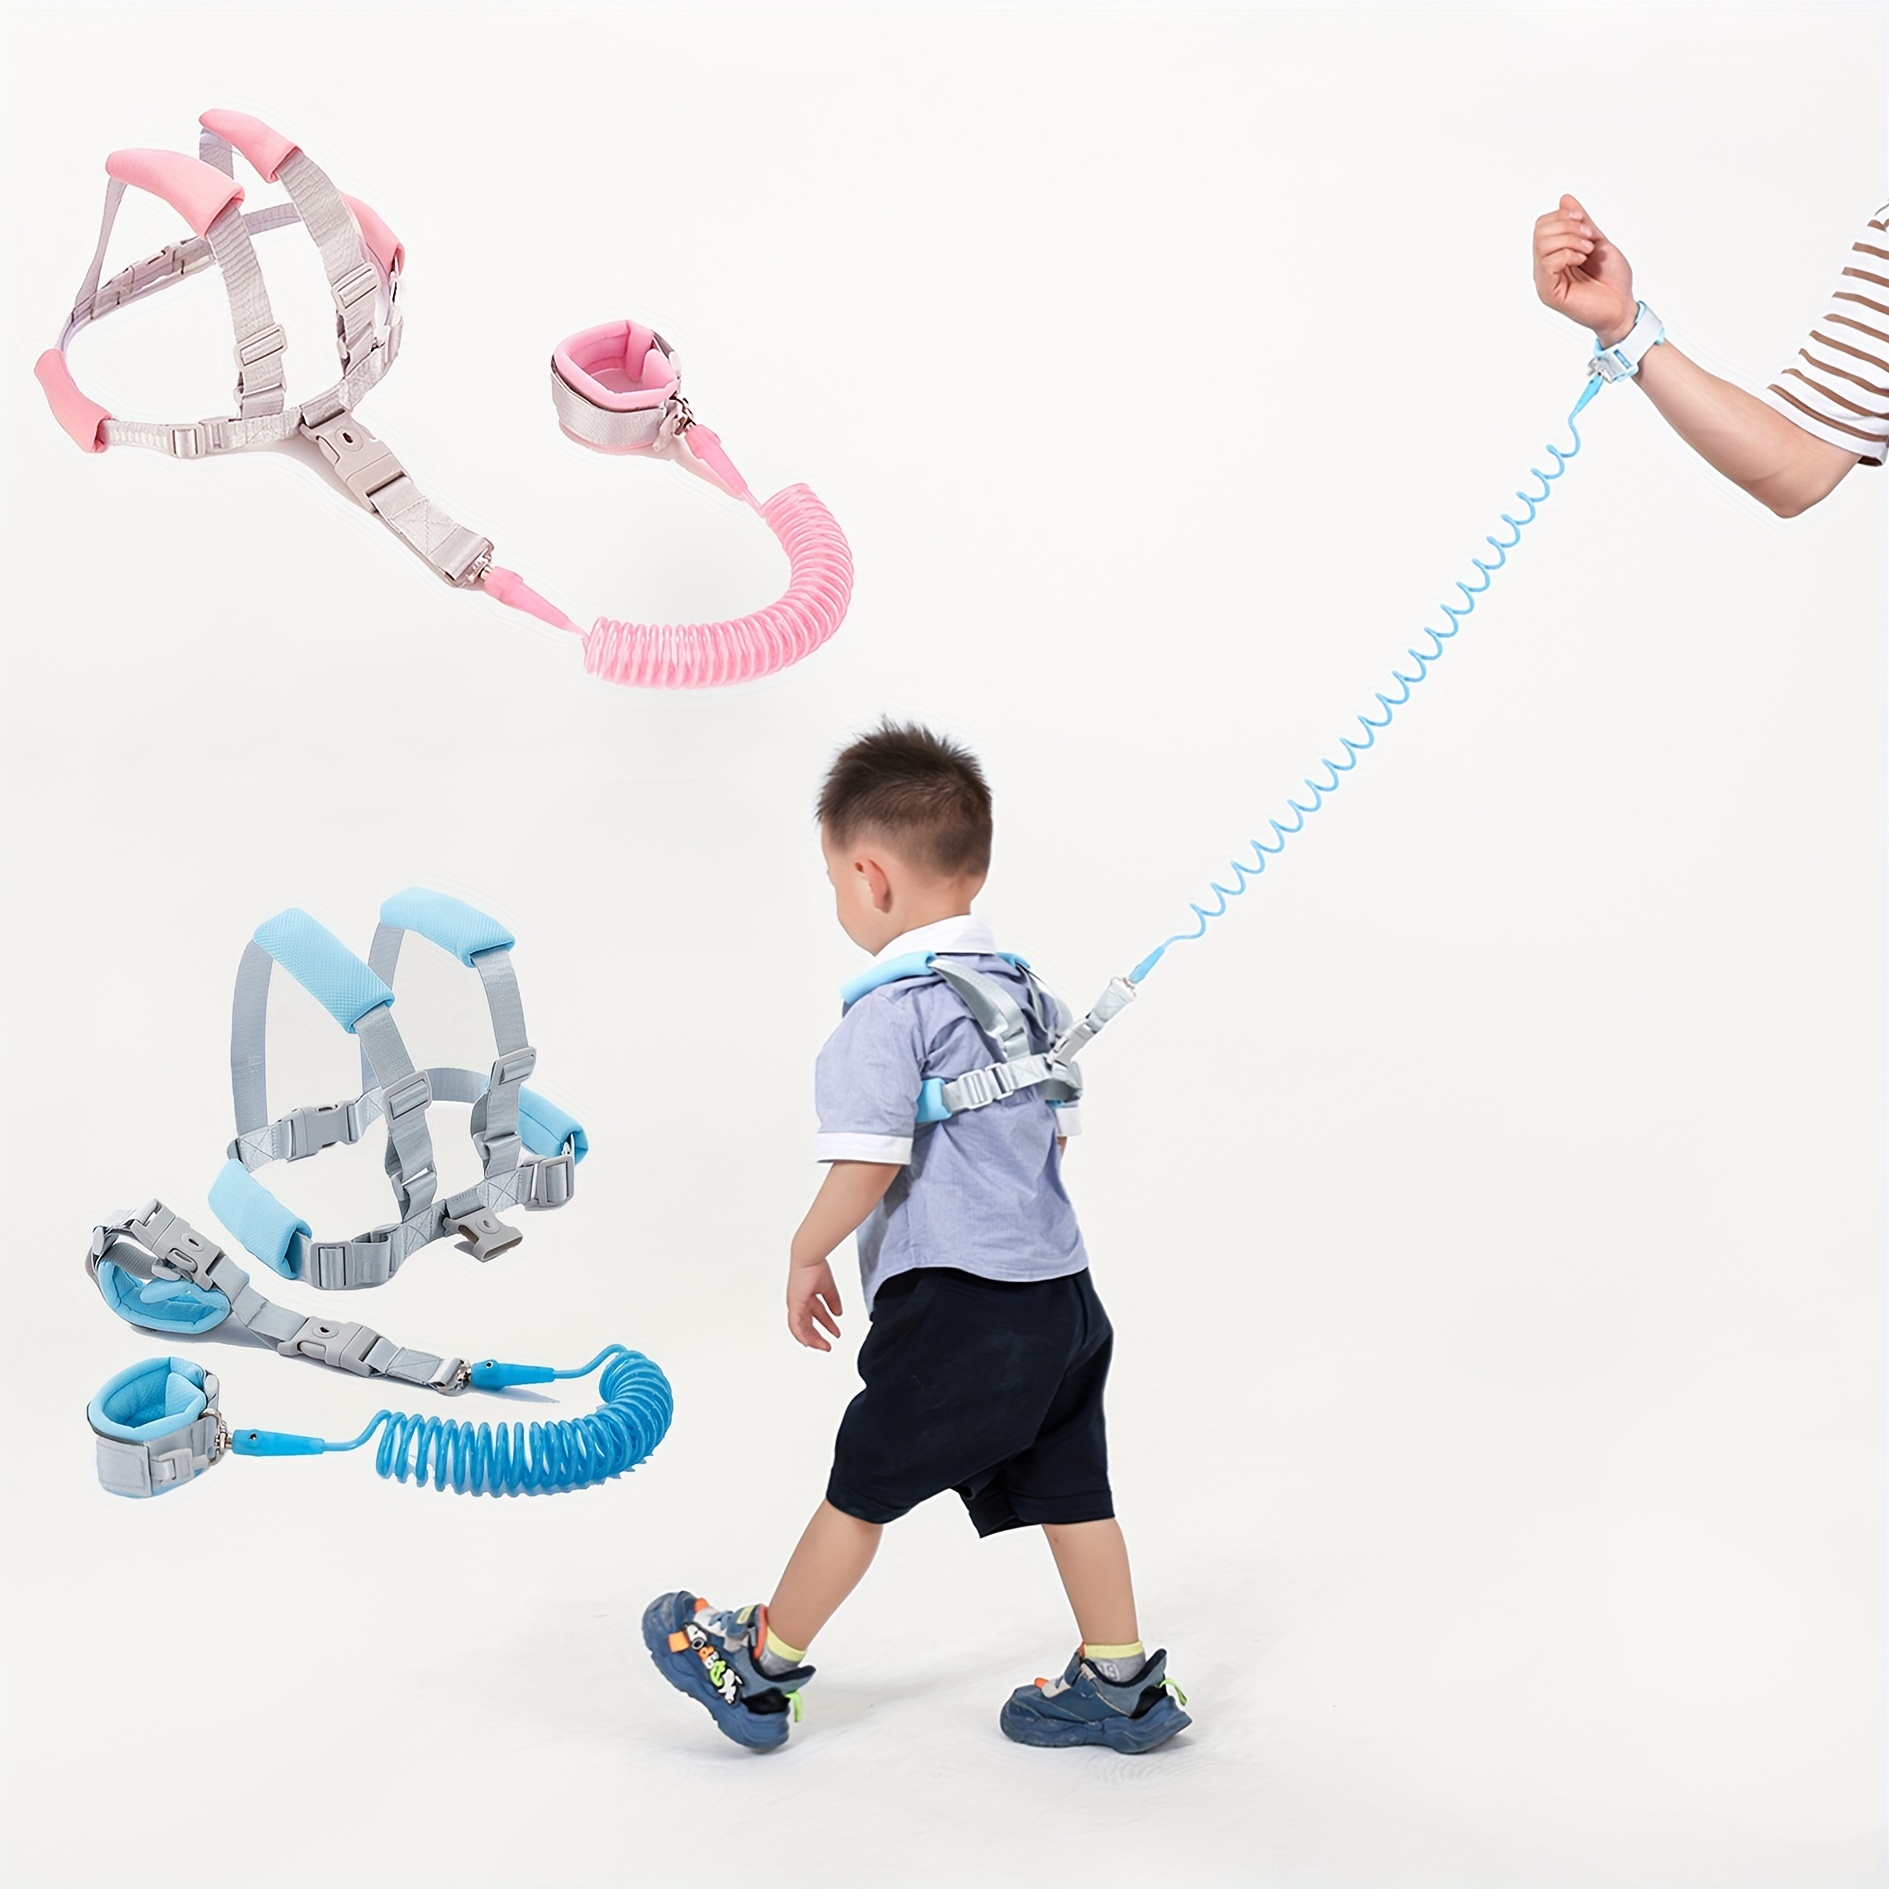 

Baby And Child Anti-lost Leash, Anti Lost Wrist Link For Toddlers - Toddler Harness, 2 Meters/ 6.56ft Anti-lost Spring Rope, Walking Safety Harness, Halloween, Thanksgiving And Christmas Gift